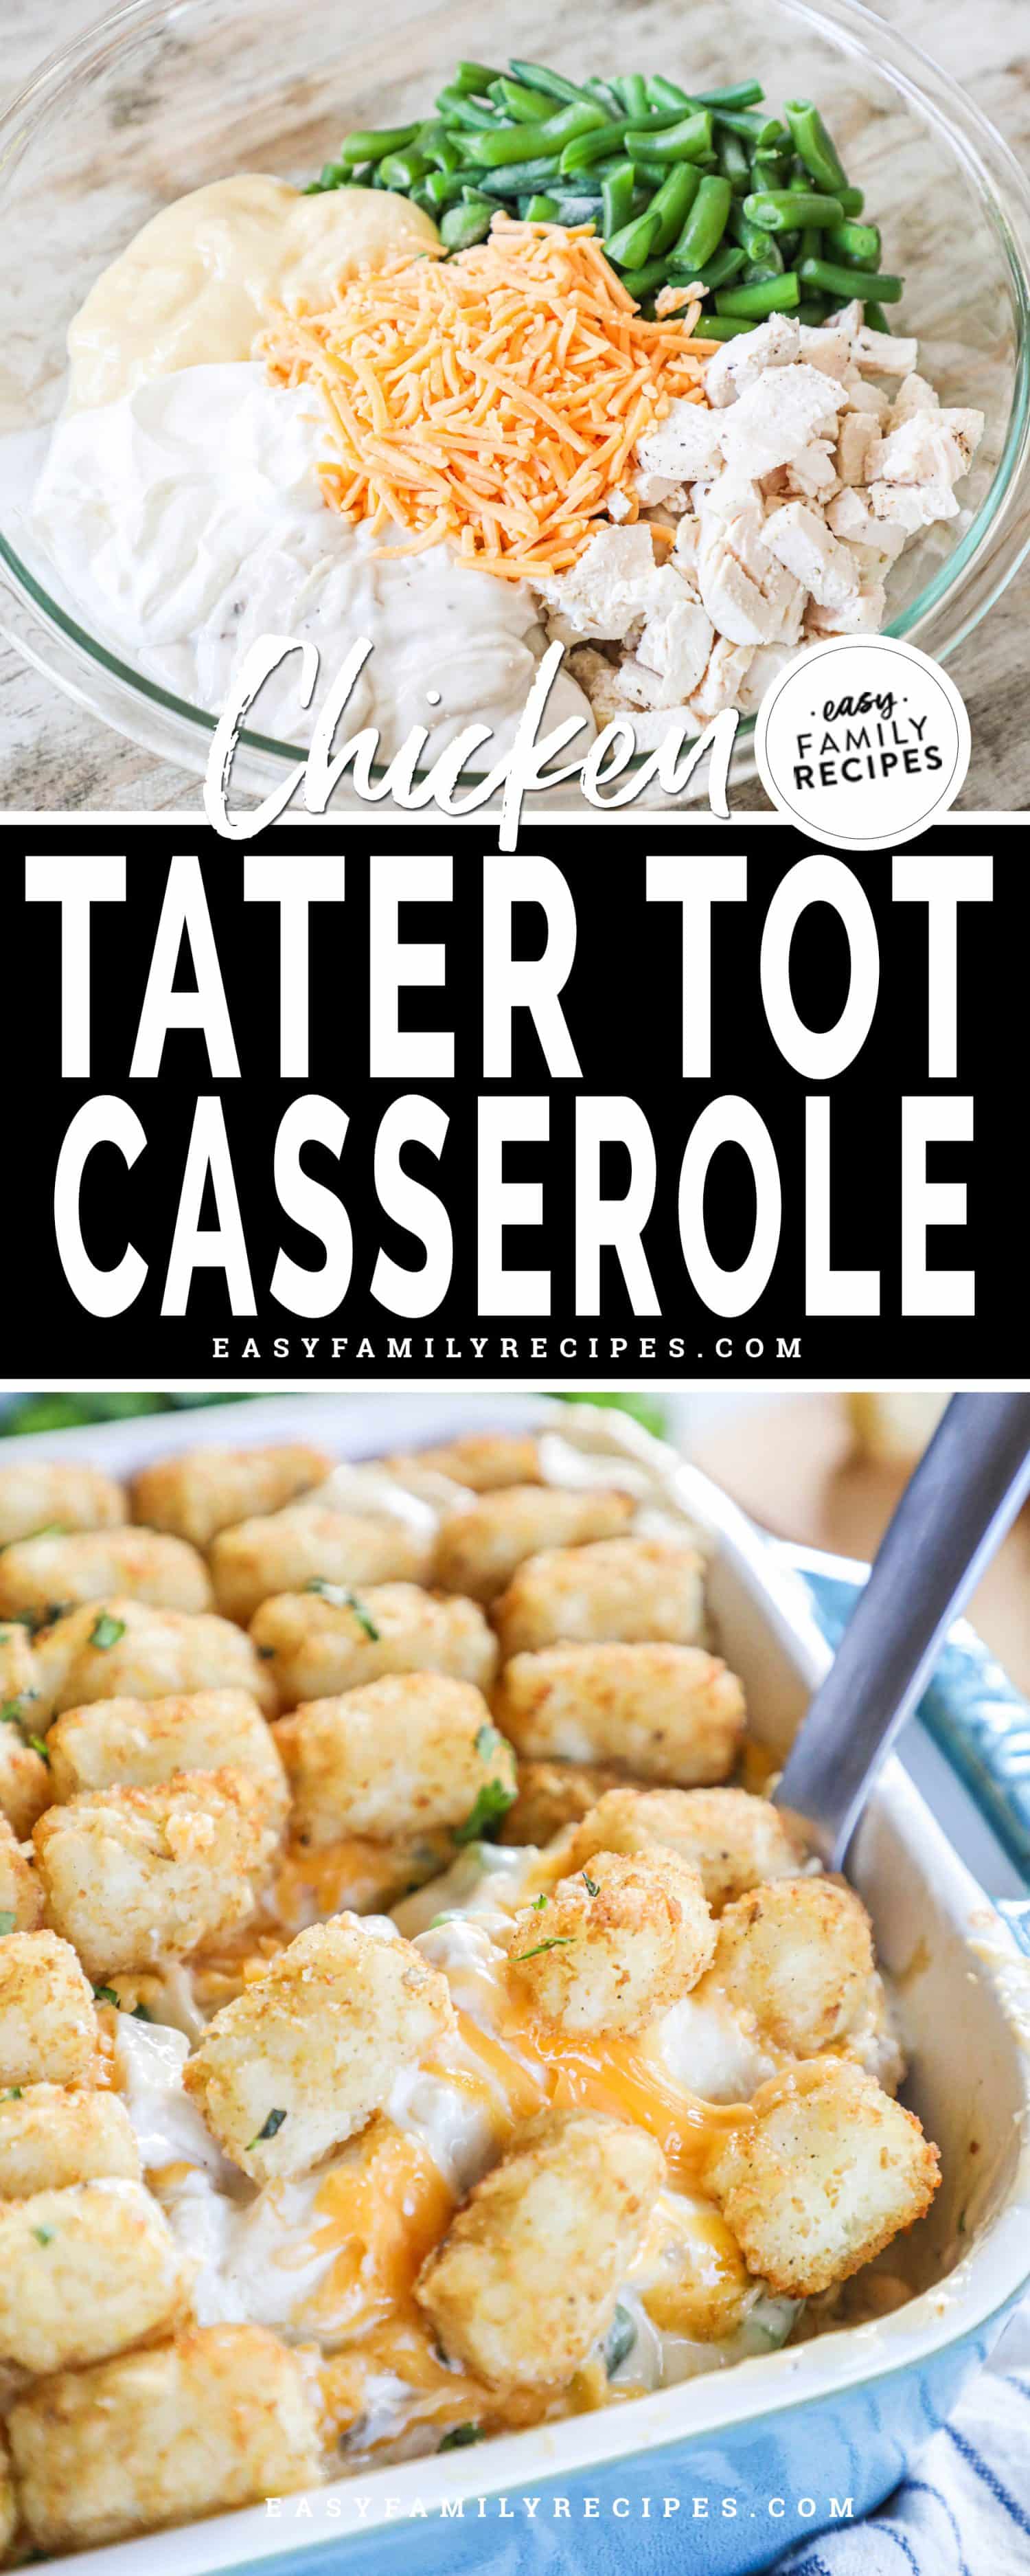 two image collage of chicken filling ingredients in a bowl and a finished tater tot casserole in a baking dish.